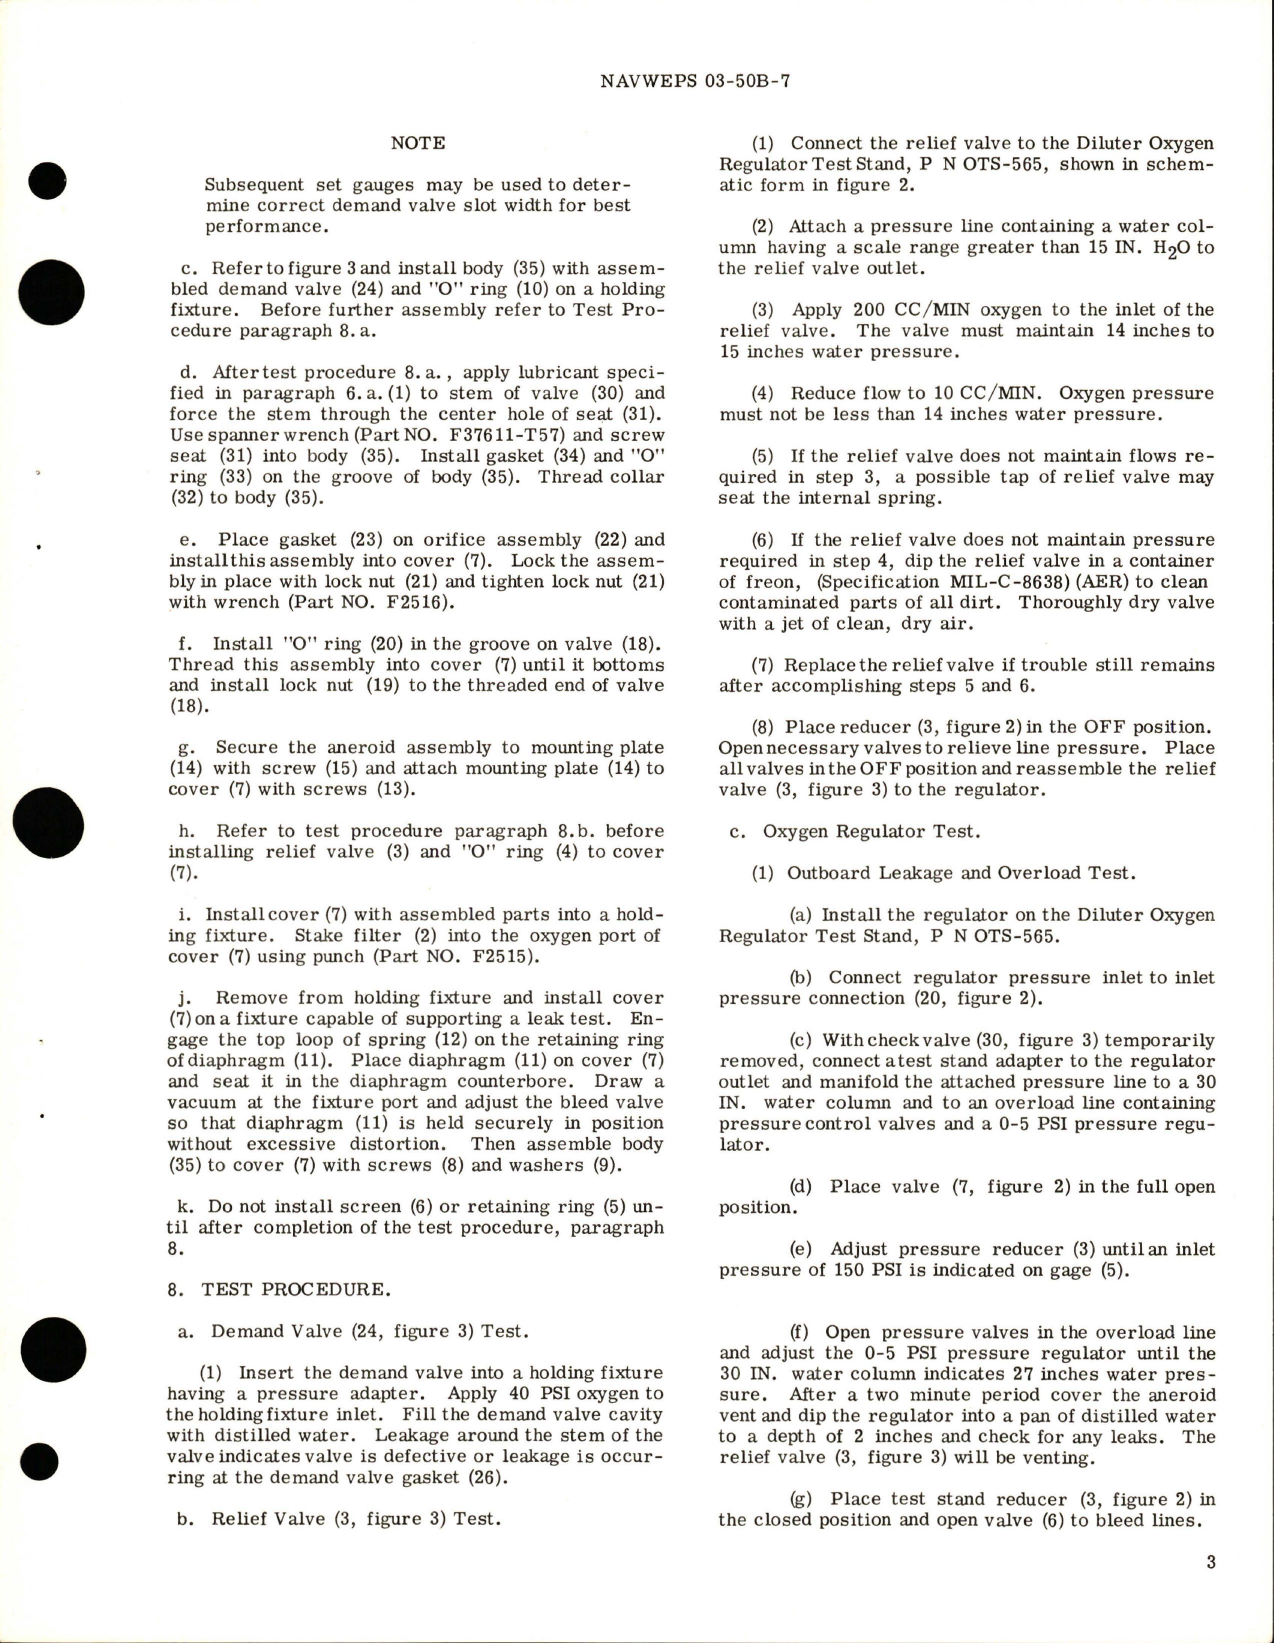 Sample page 5 from AirCorps Library document: Overhaul Instructions with Parts Breakdown for Automatic Pressure Breathing Regulator - Parts F376105-1, F376105-5, F376105-7, F37605-5, and F37605-7